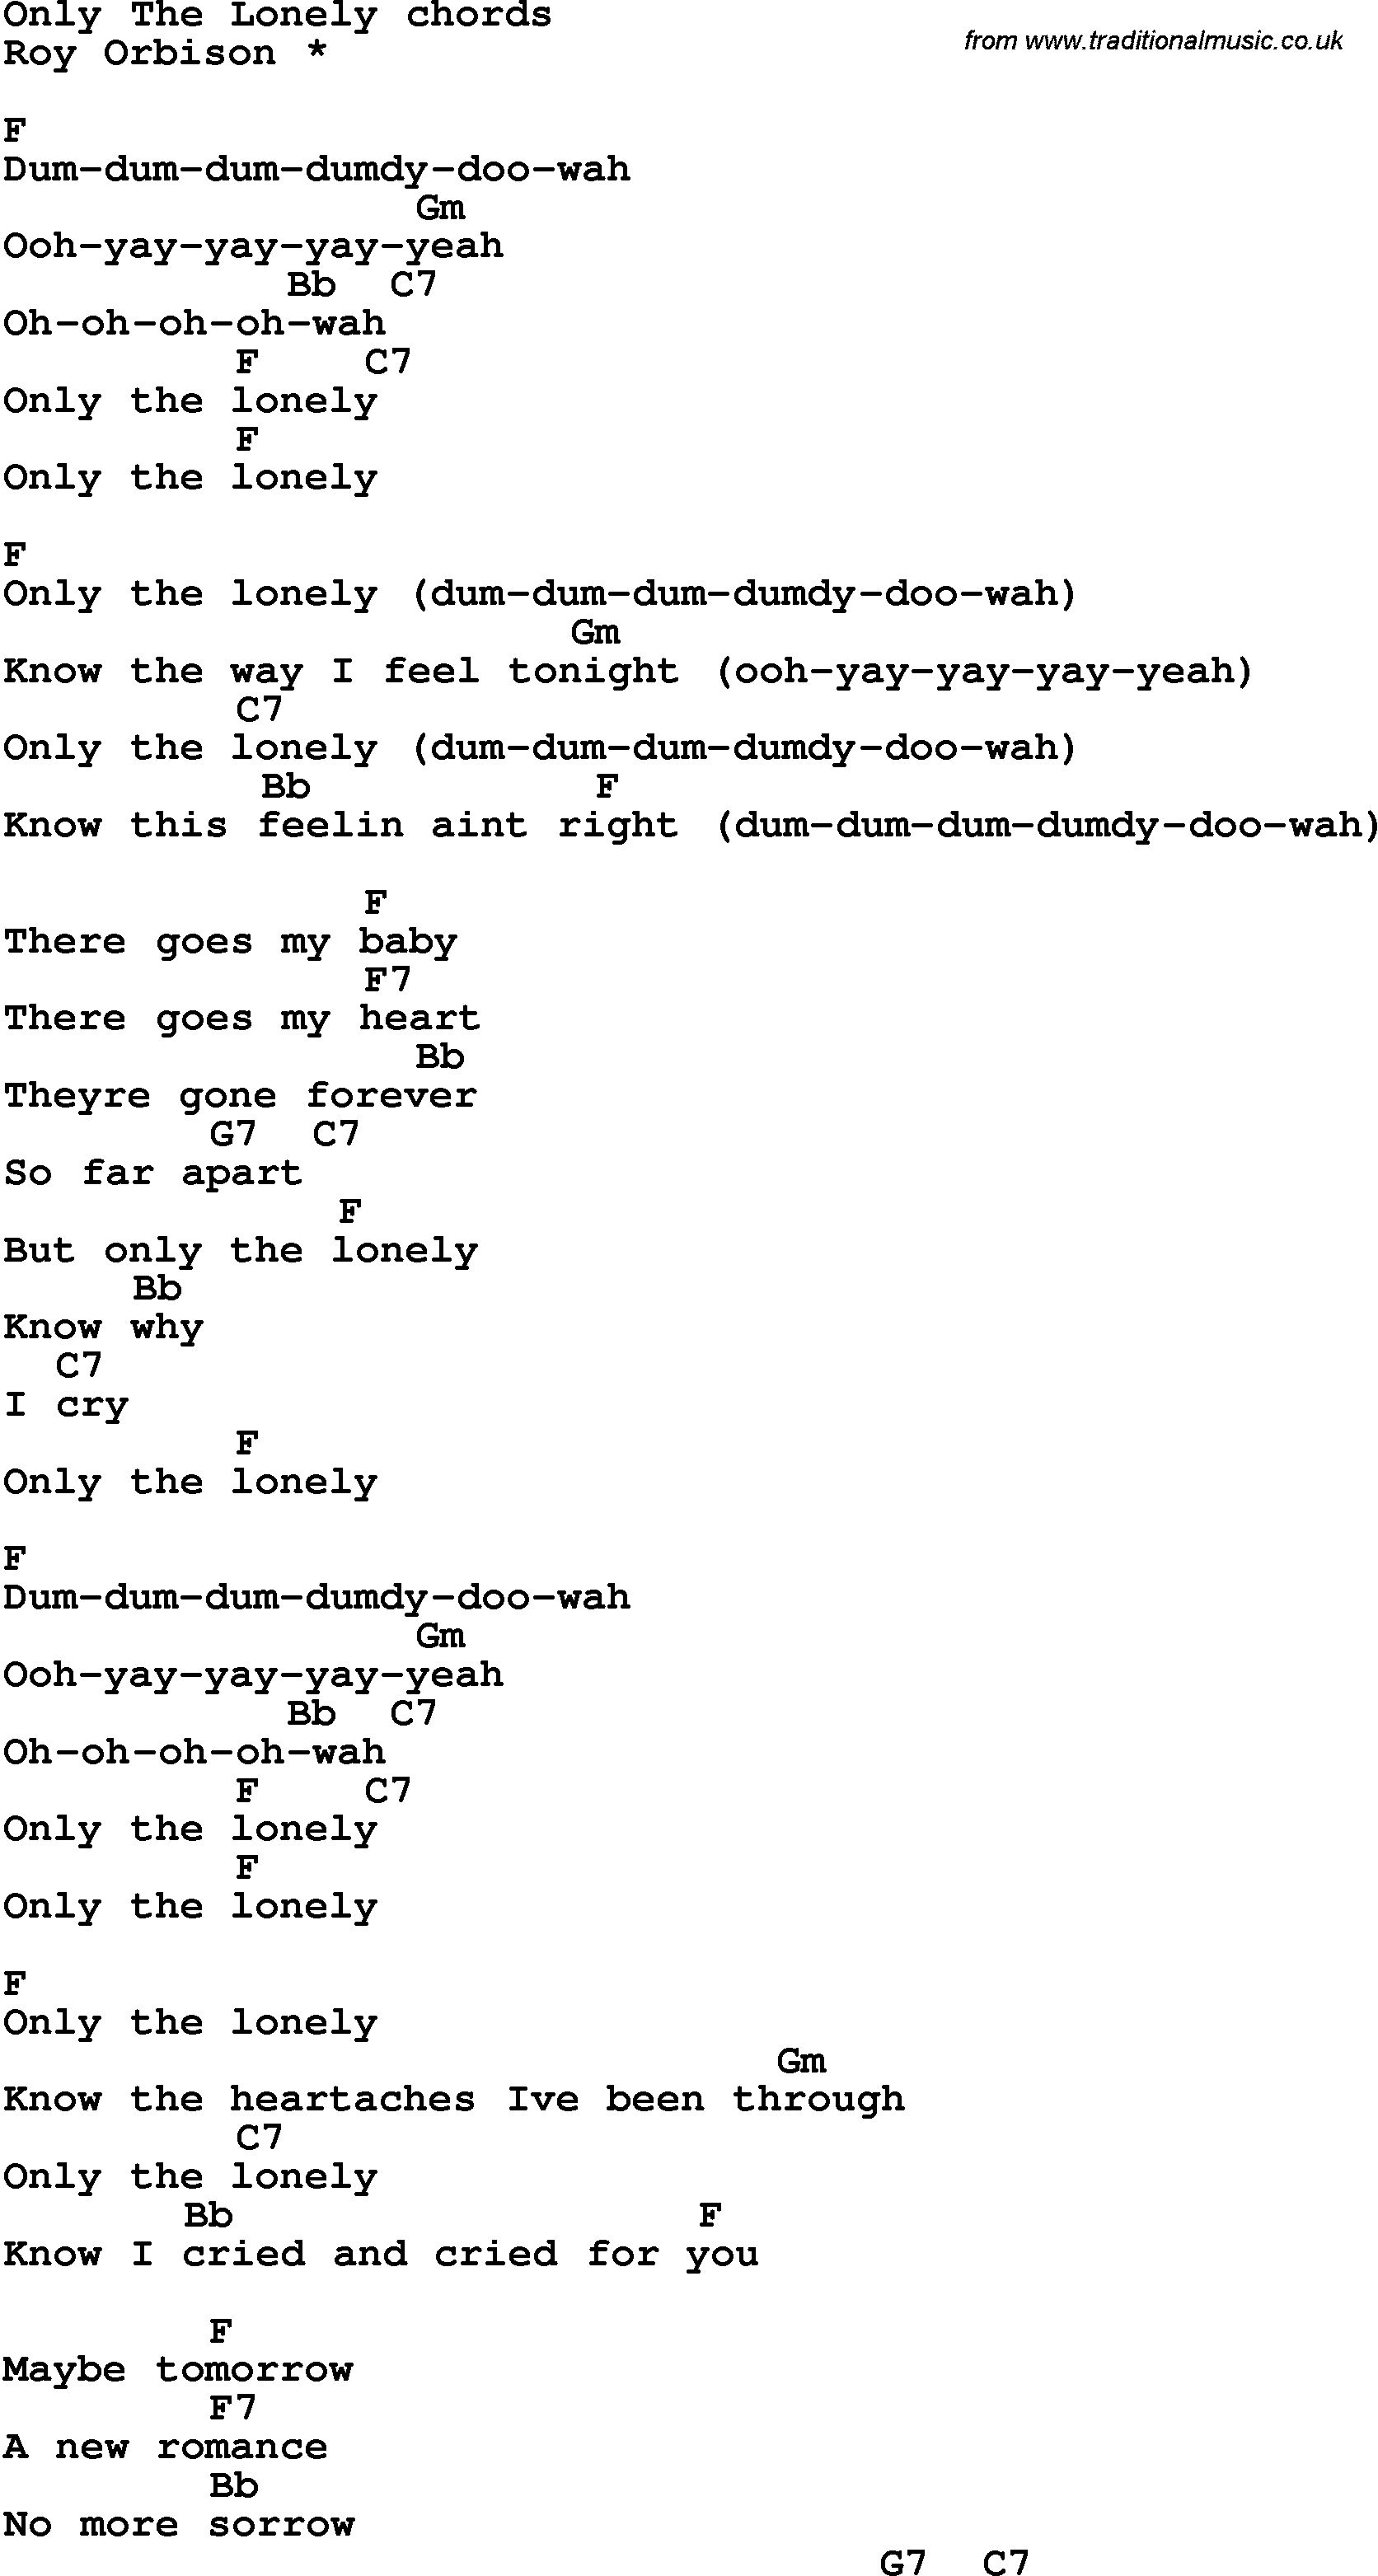 Song Lyrics with guitar chords for Only The Lonely - Roy Orbison